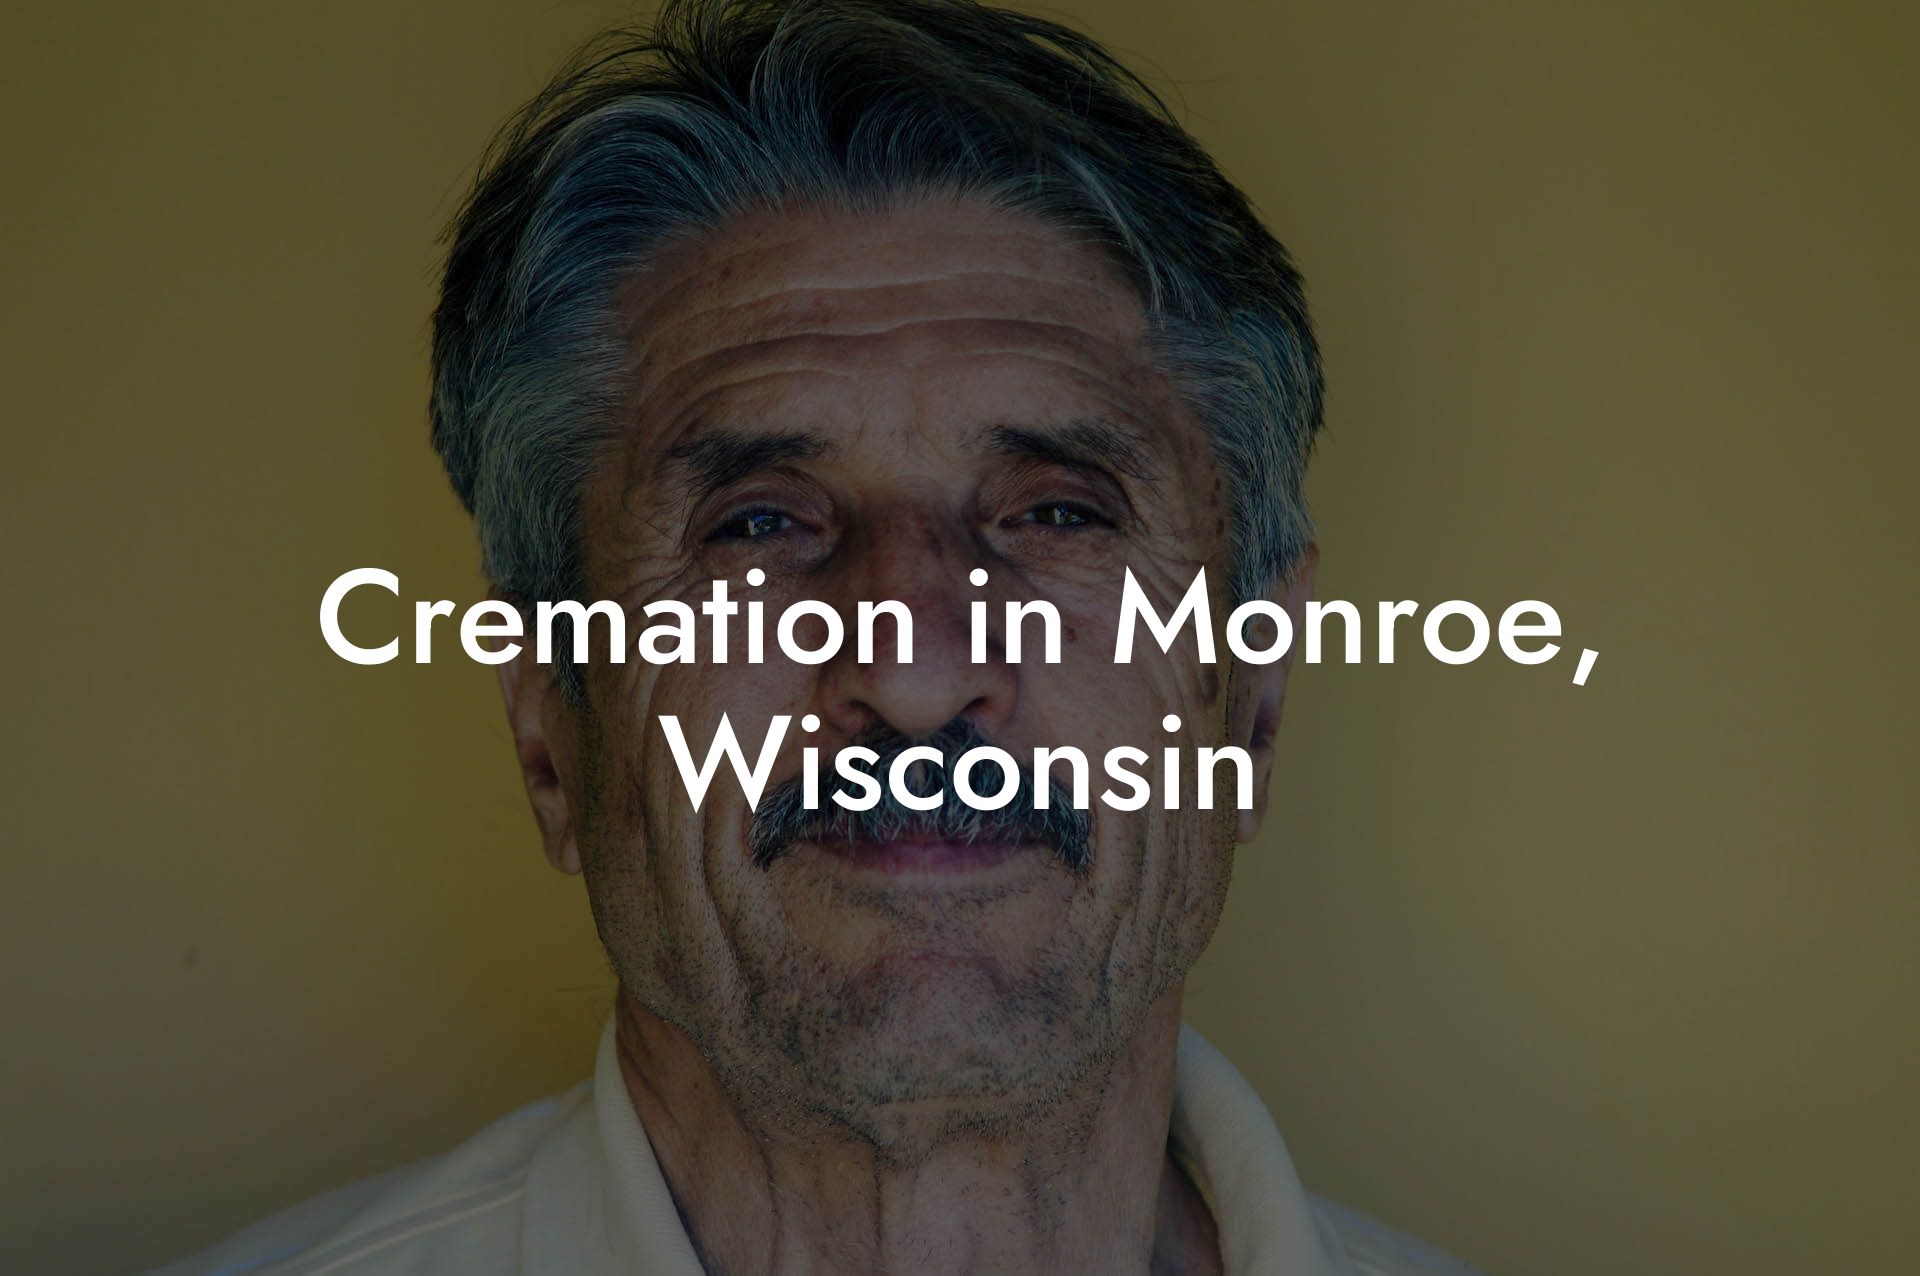 Cremation in Monroe, Wisconsin